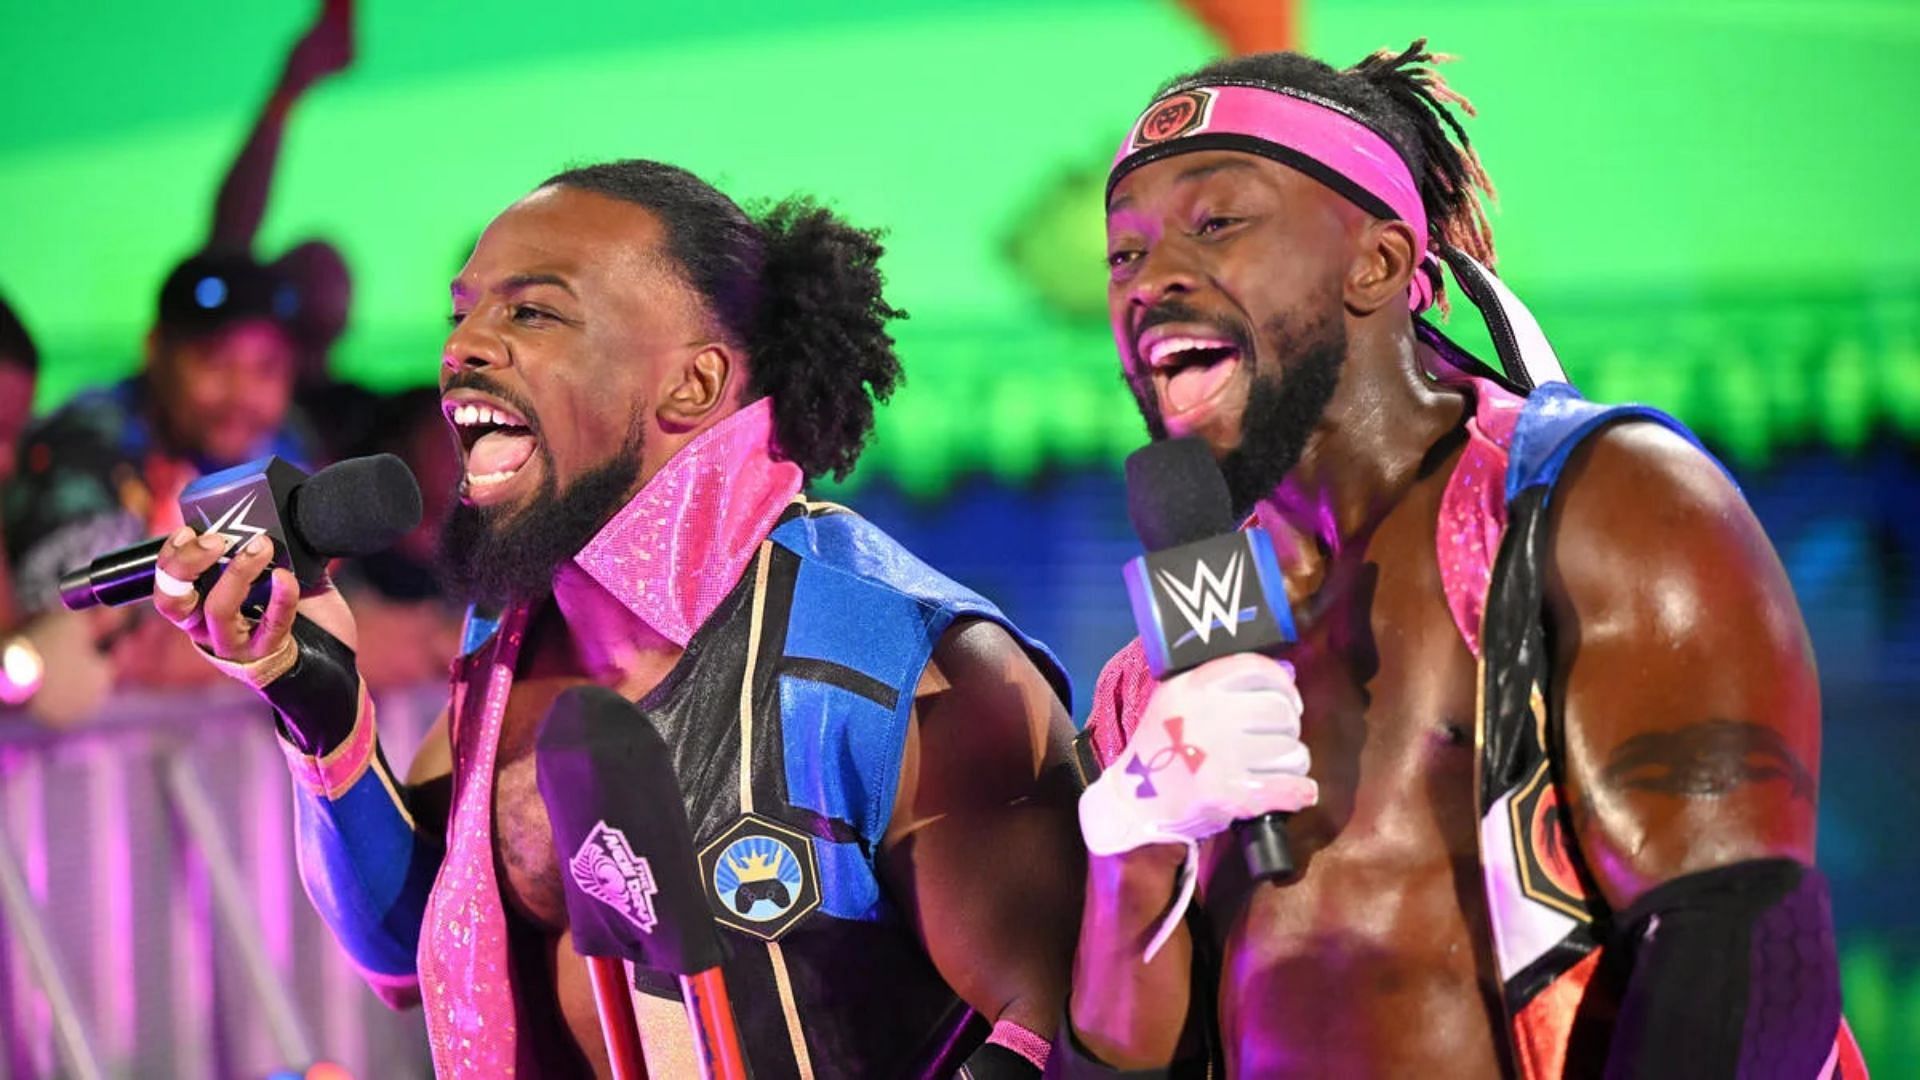 And then there were two in The New Day.